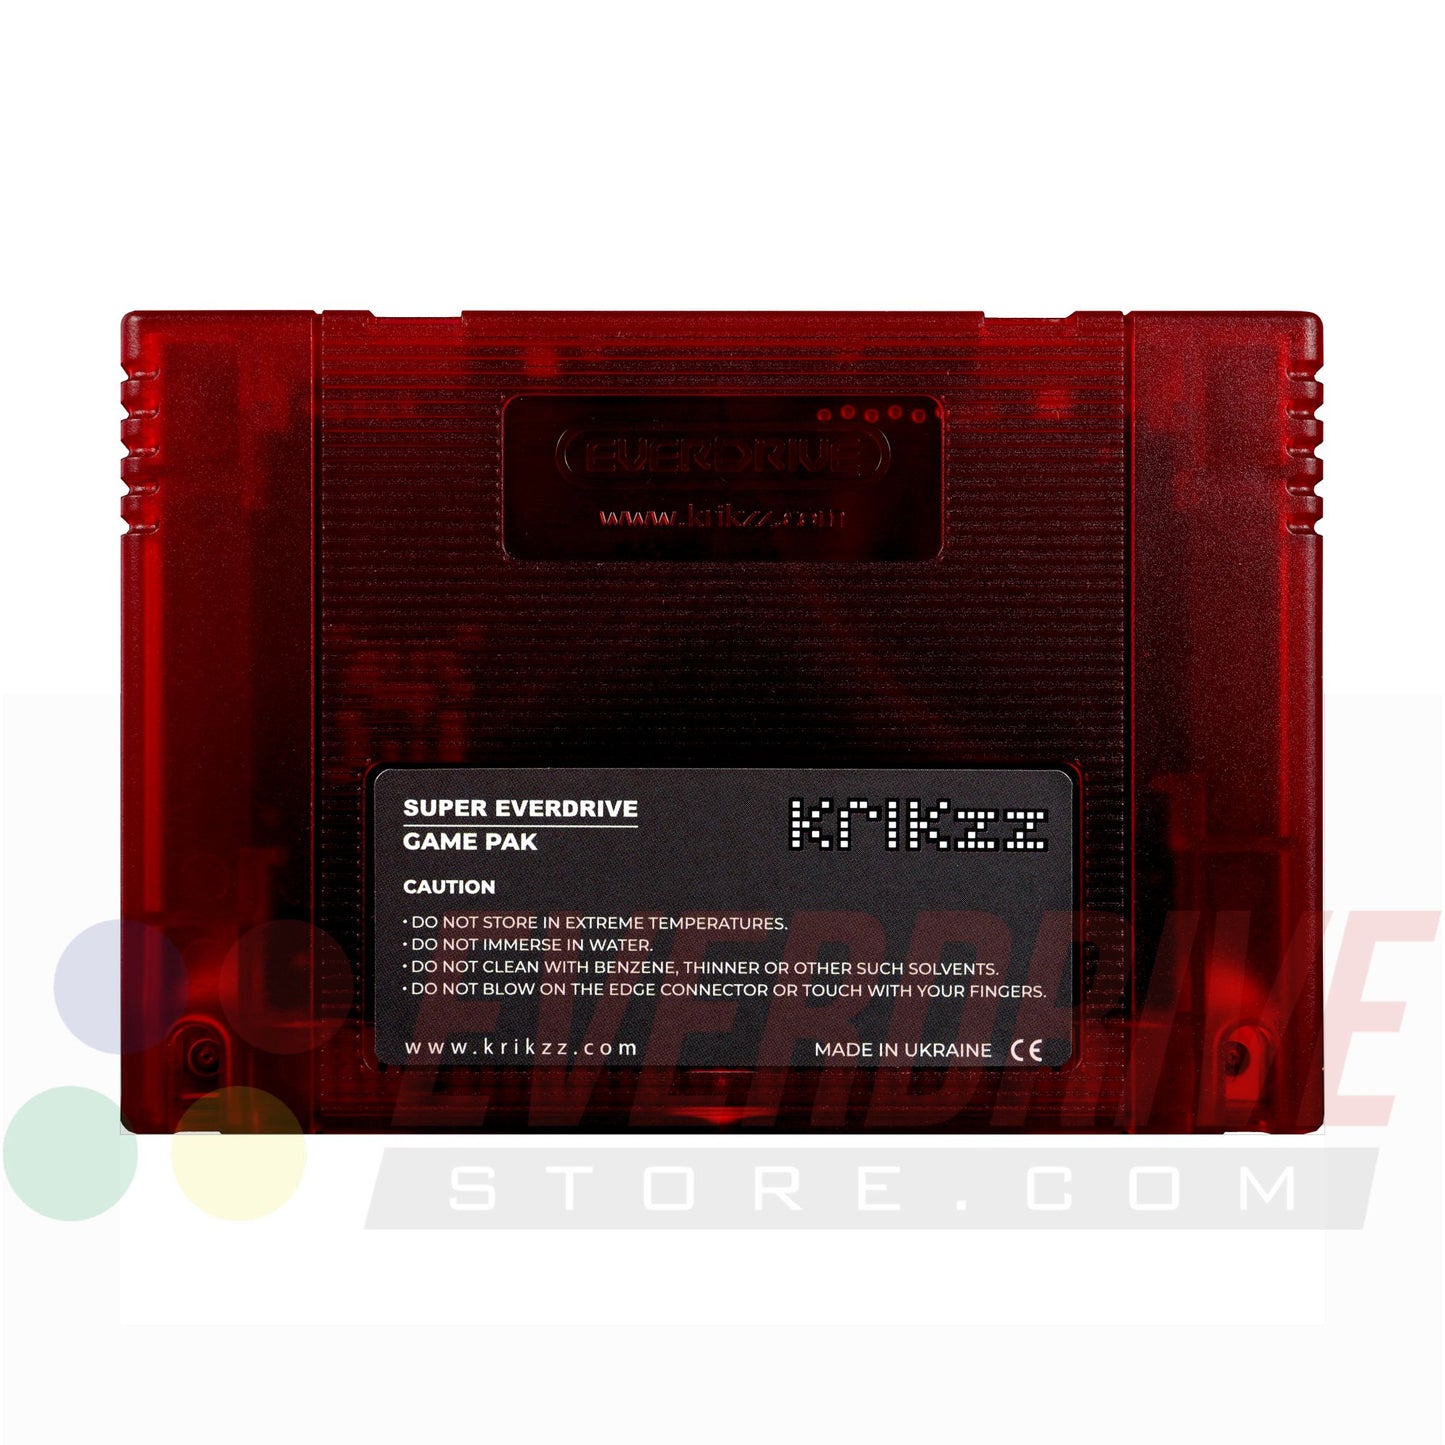 Super Everdrive X6 DSP - Frosted Red